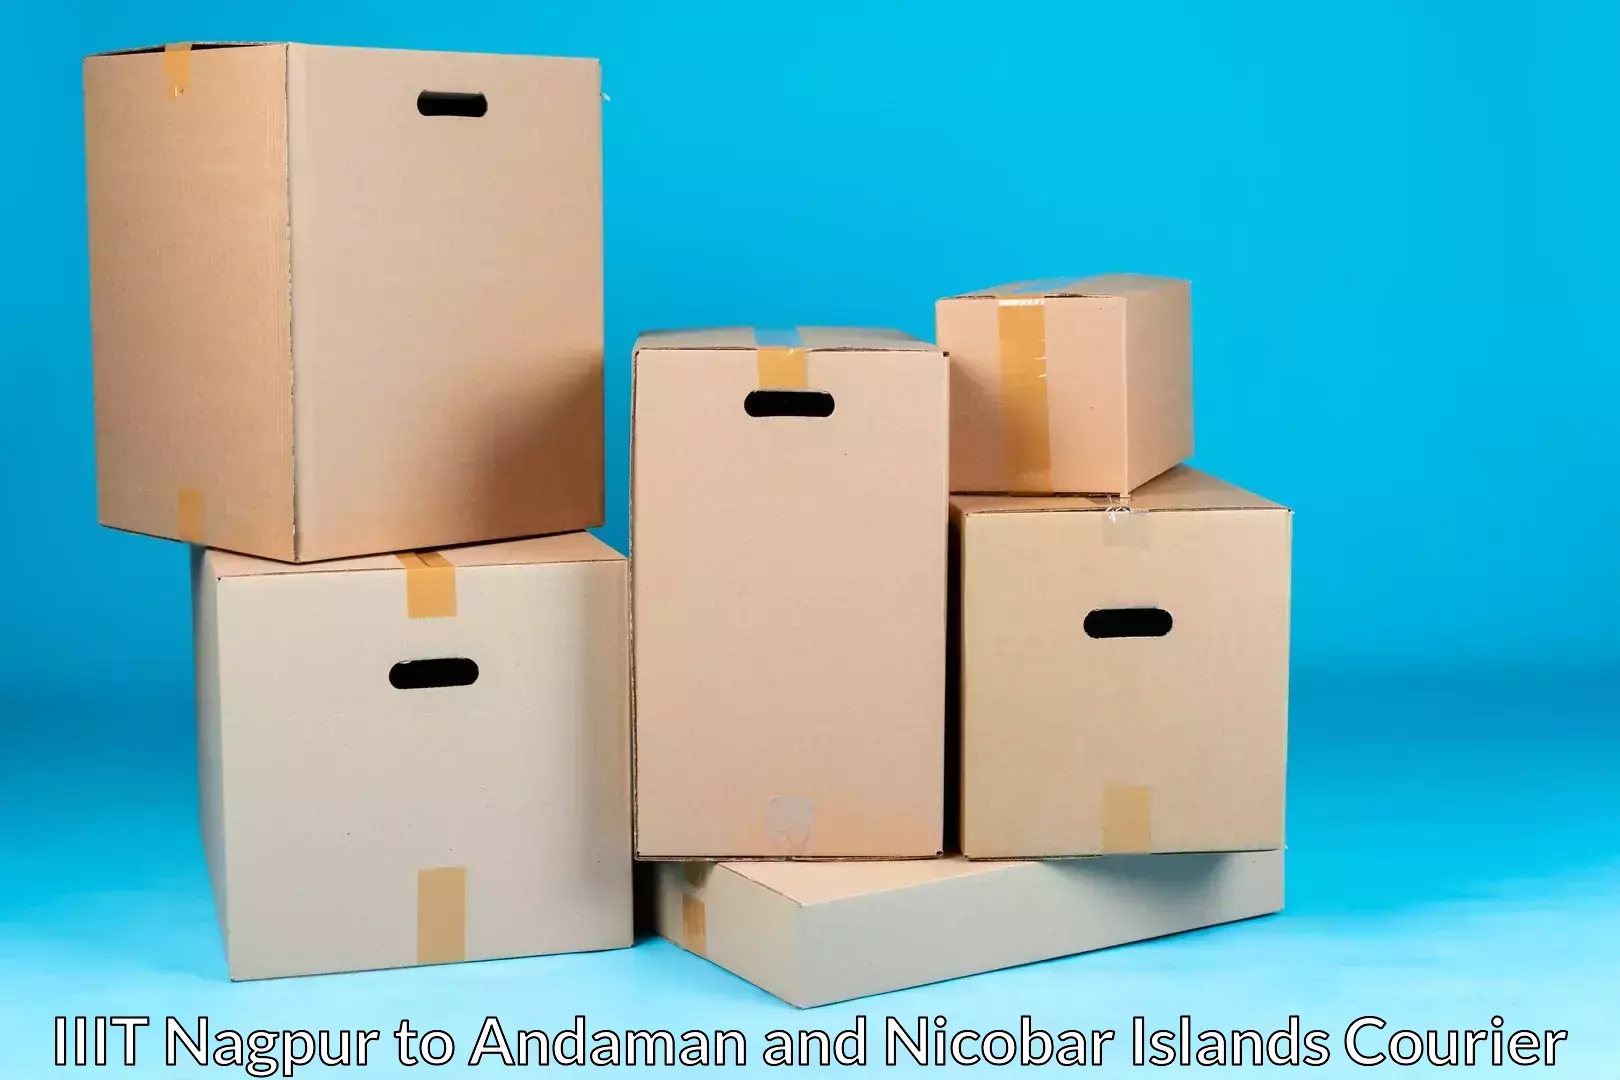 Professional relocation services IIIT Nagpur to Andaman and Nicobar Islands